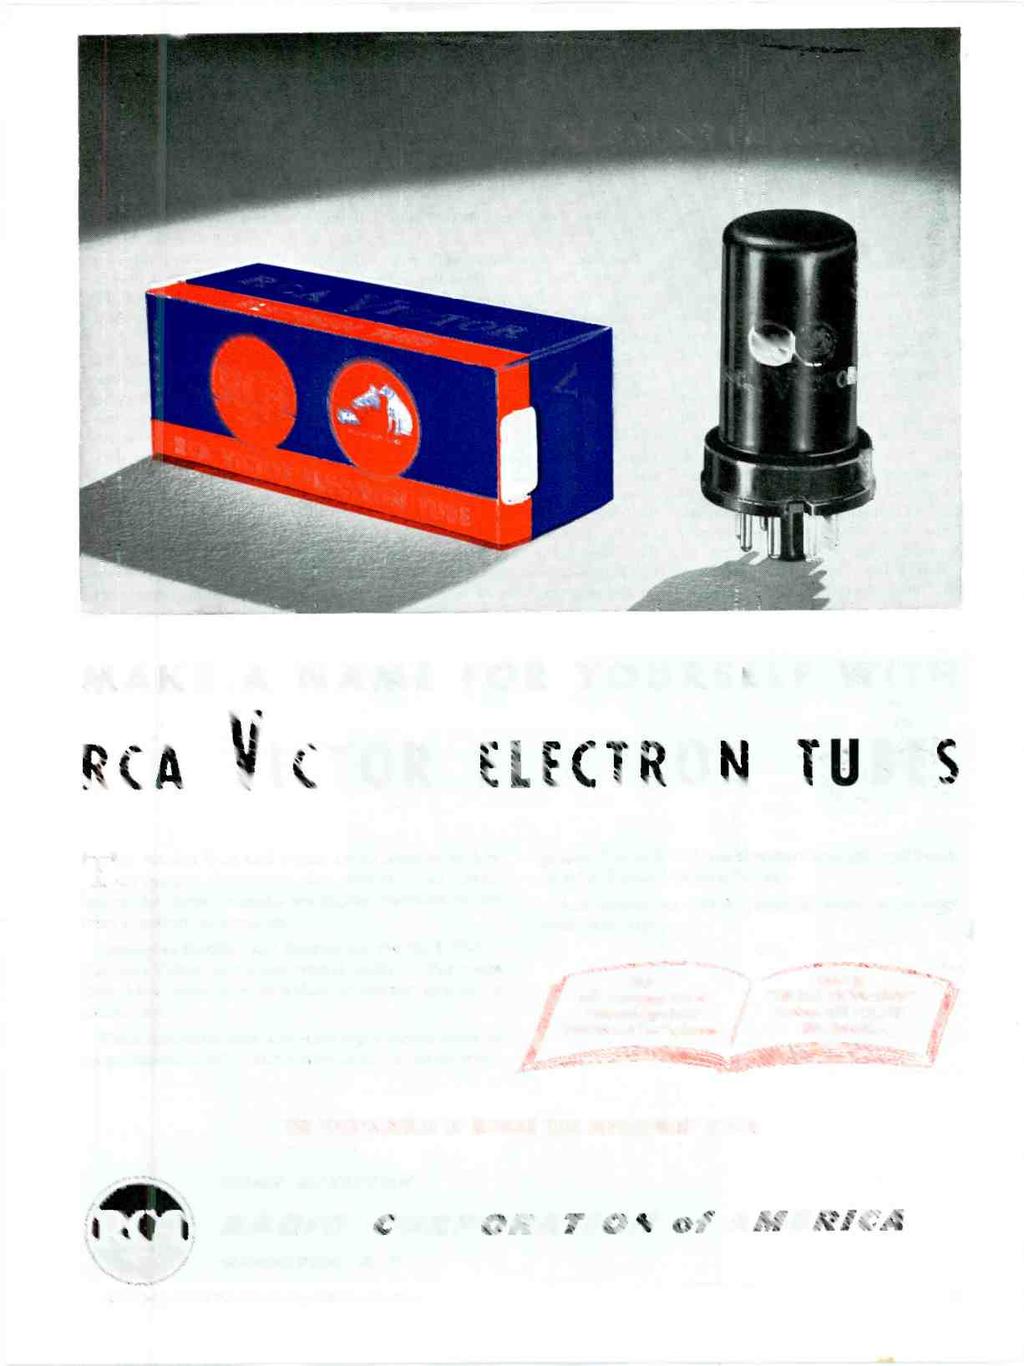 MAKE A NAME FOR YOURSELF WITH RCA VICTOR ELECTRON TUBES THE NAMES RCA and Victor are as familiar as they are famous.